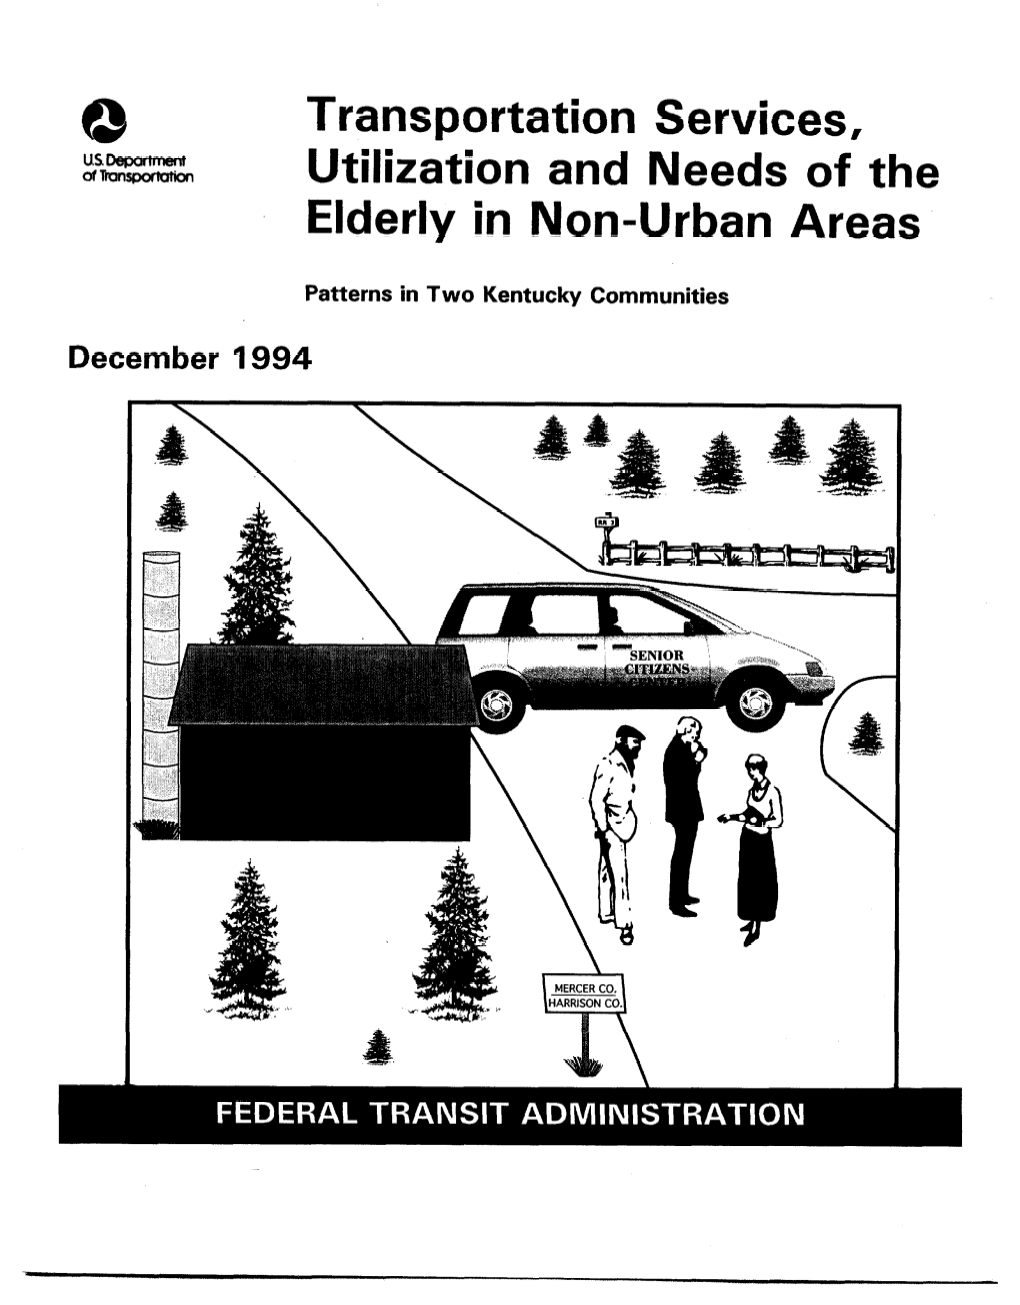 Transportation Services, Utilization and Needs of the Elderly in Non-Urban Areas